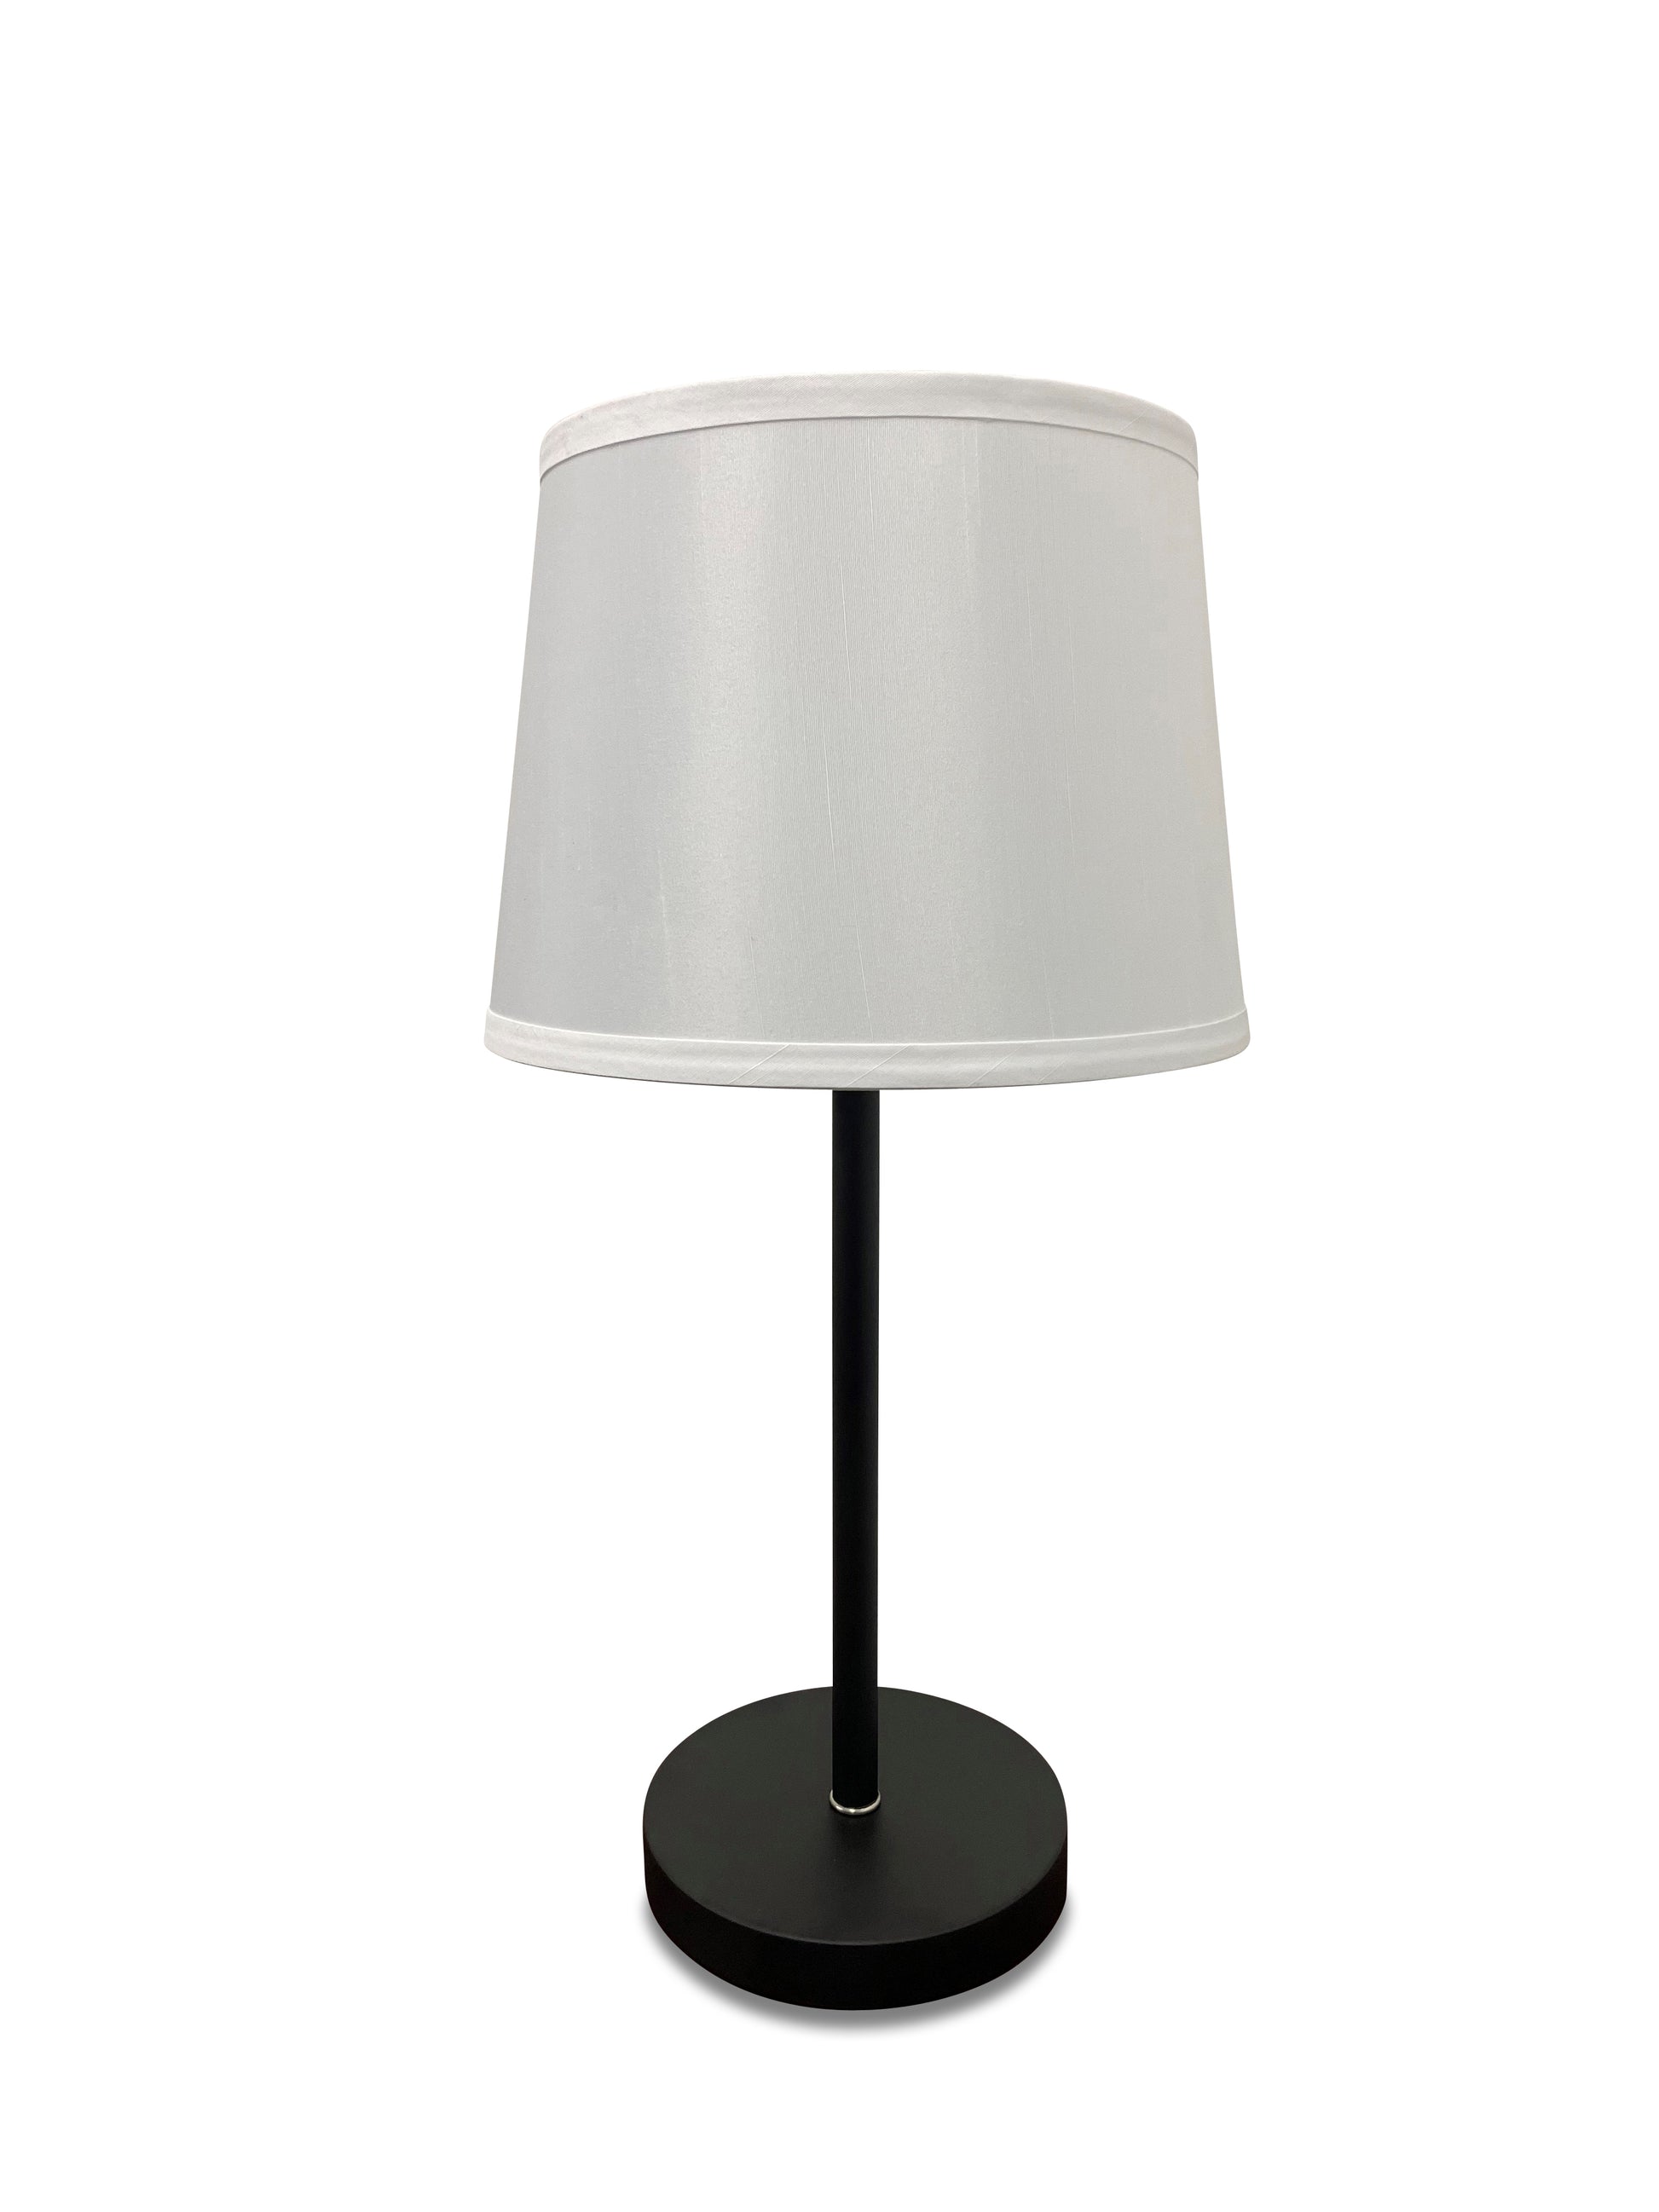 House of Troy Sawyer Black/Satin Nickel Table Lamp with USB S550-BLKSN